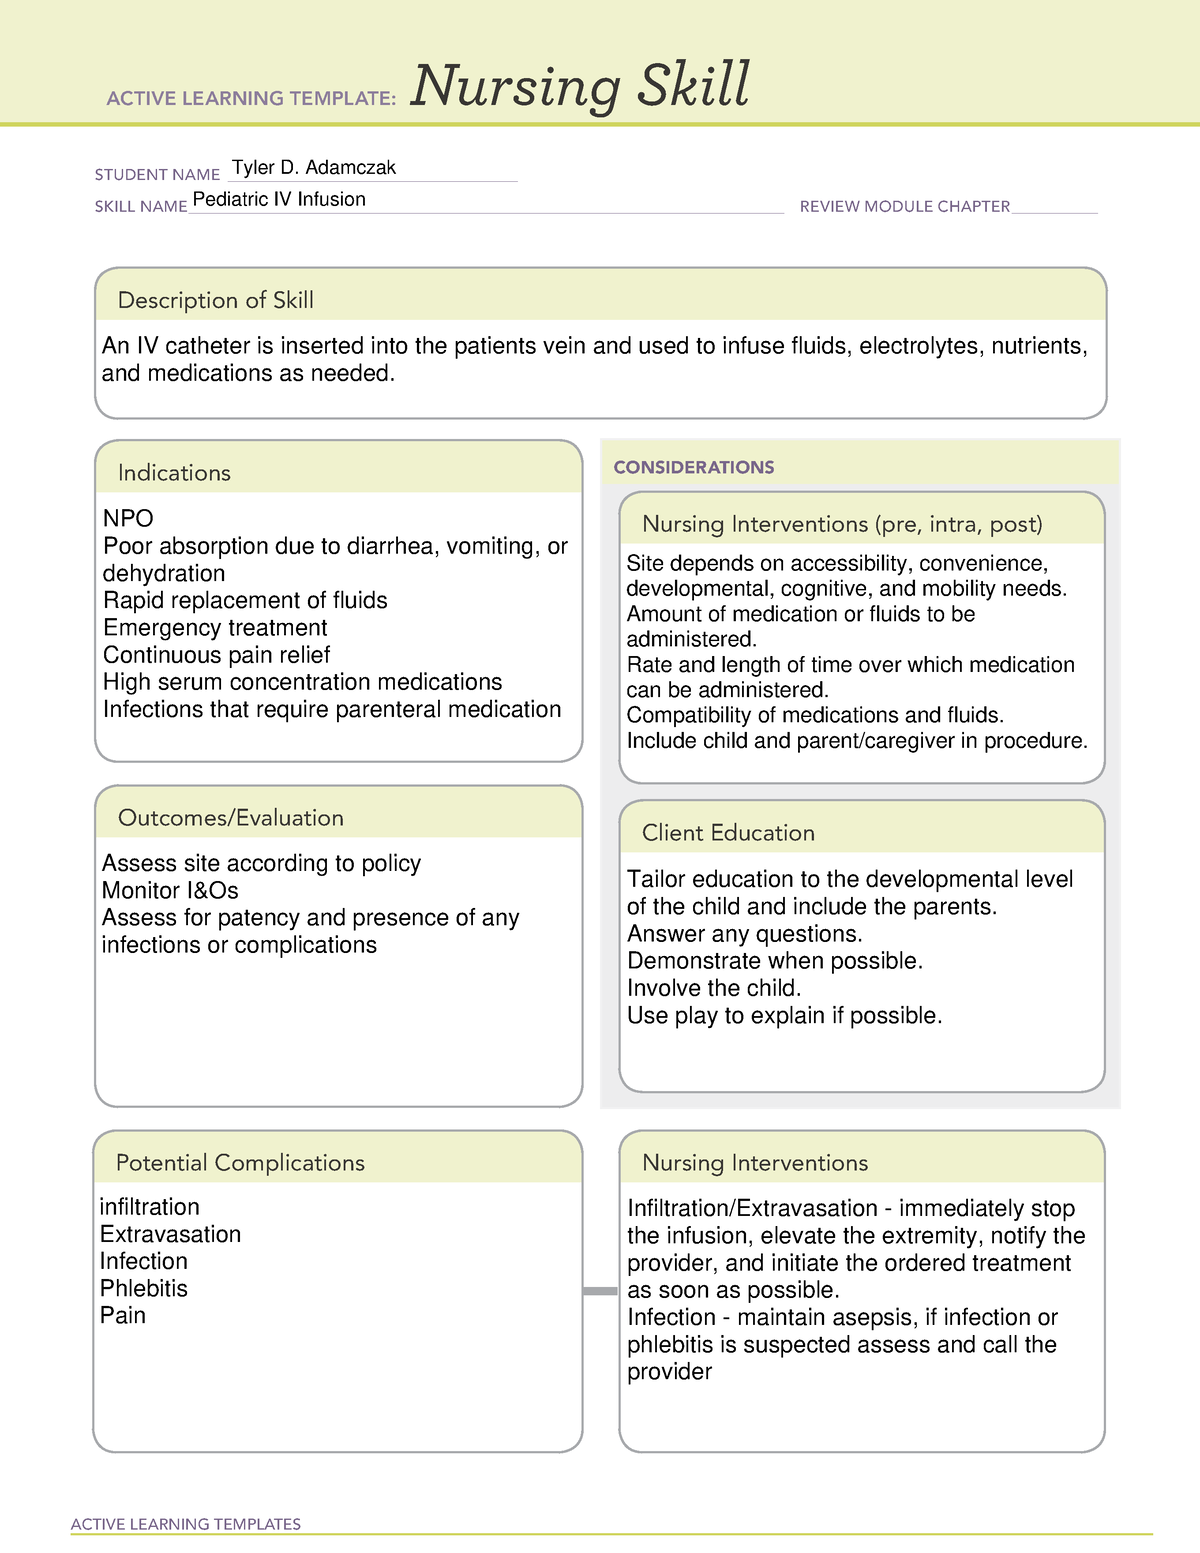 Pediatric IV Infusion Nursing Skill Template ACTIVE LEARNING